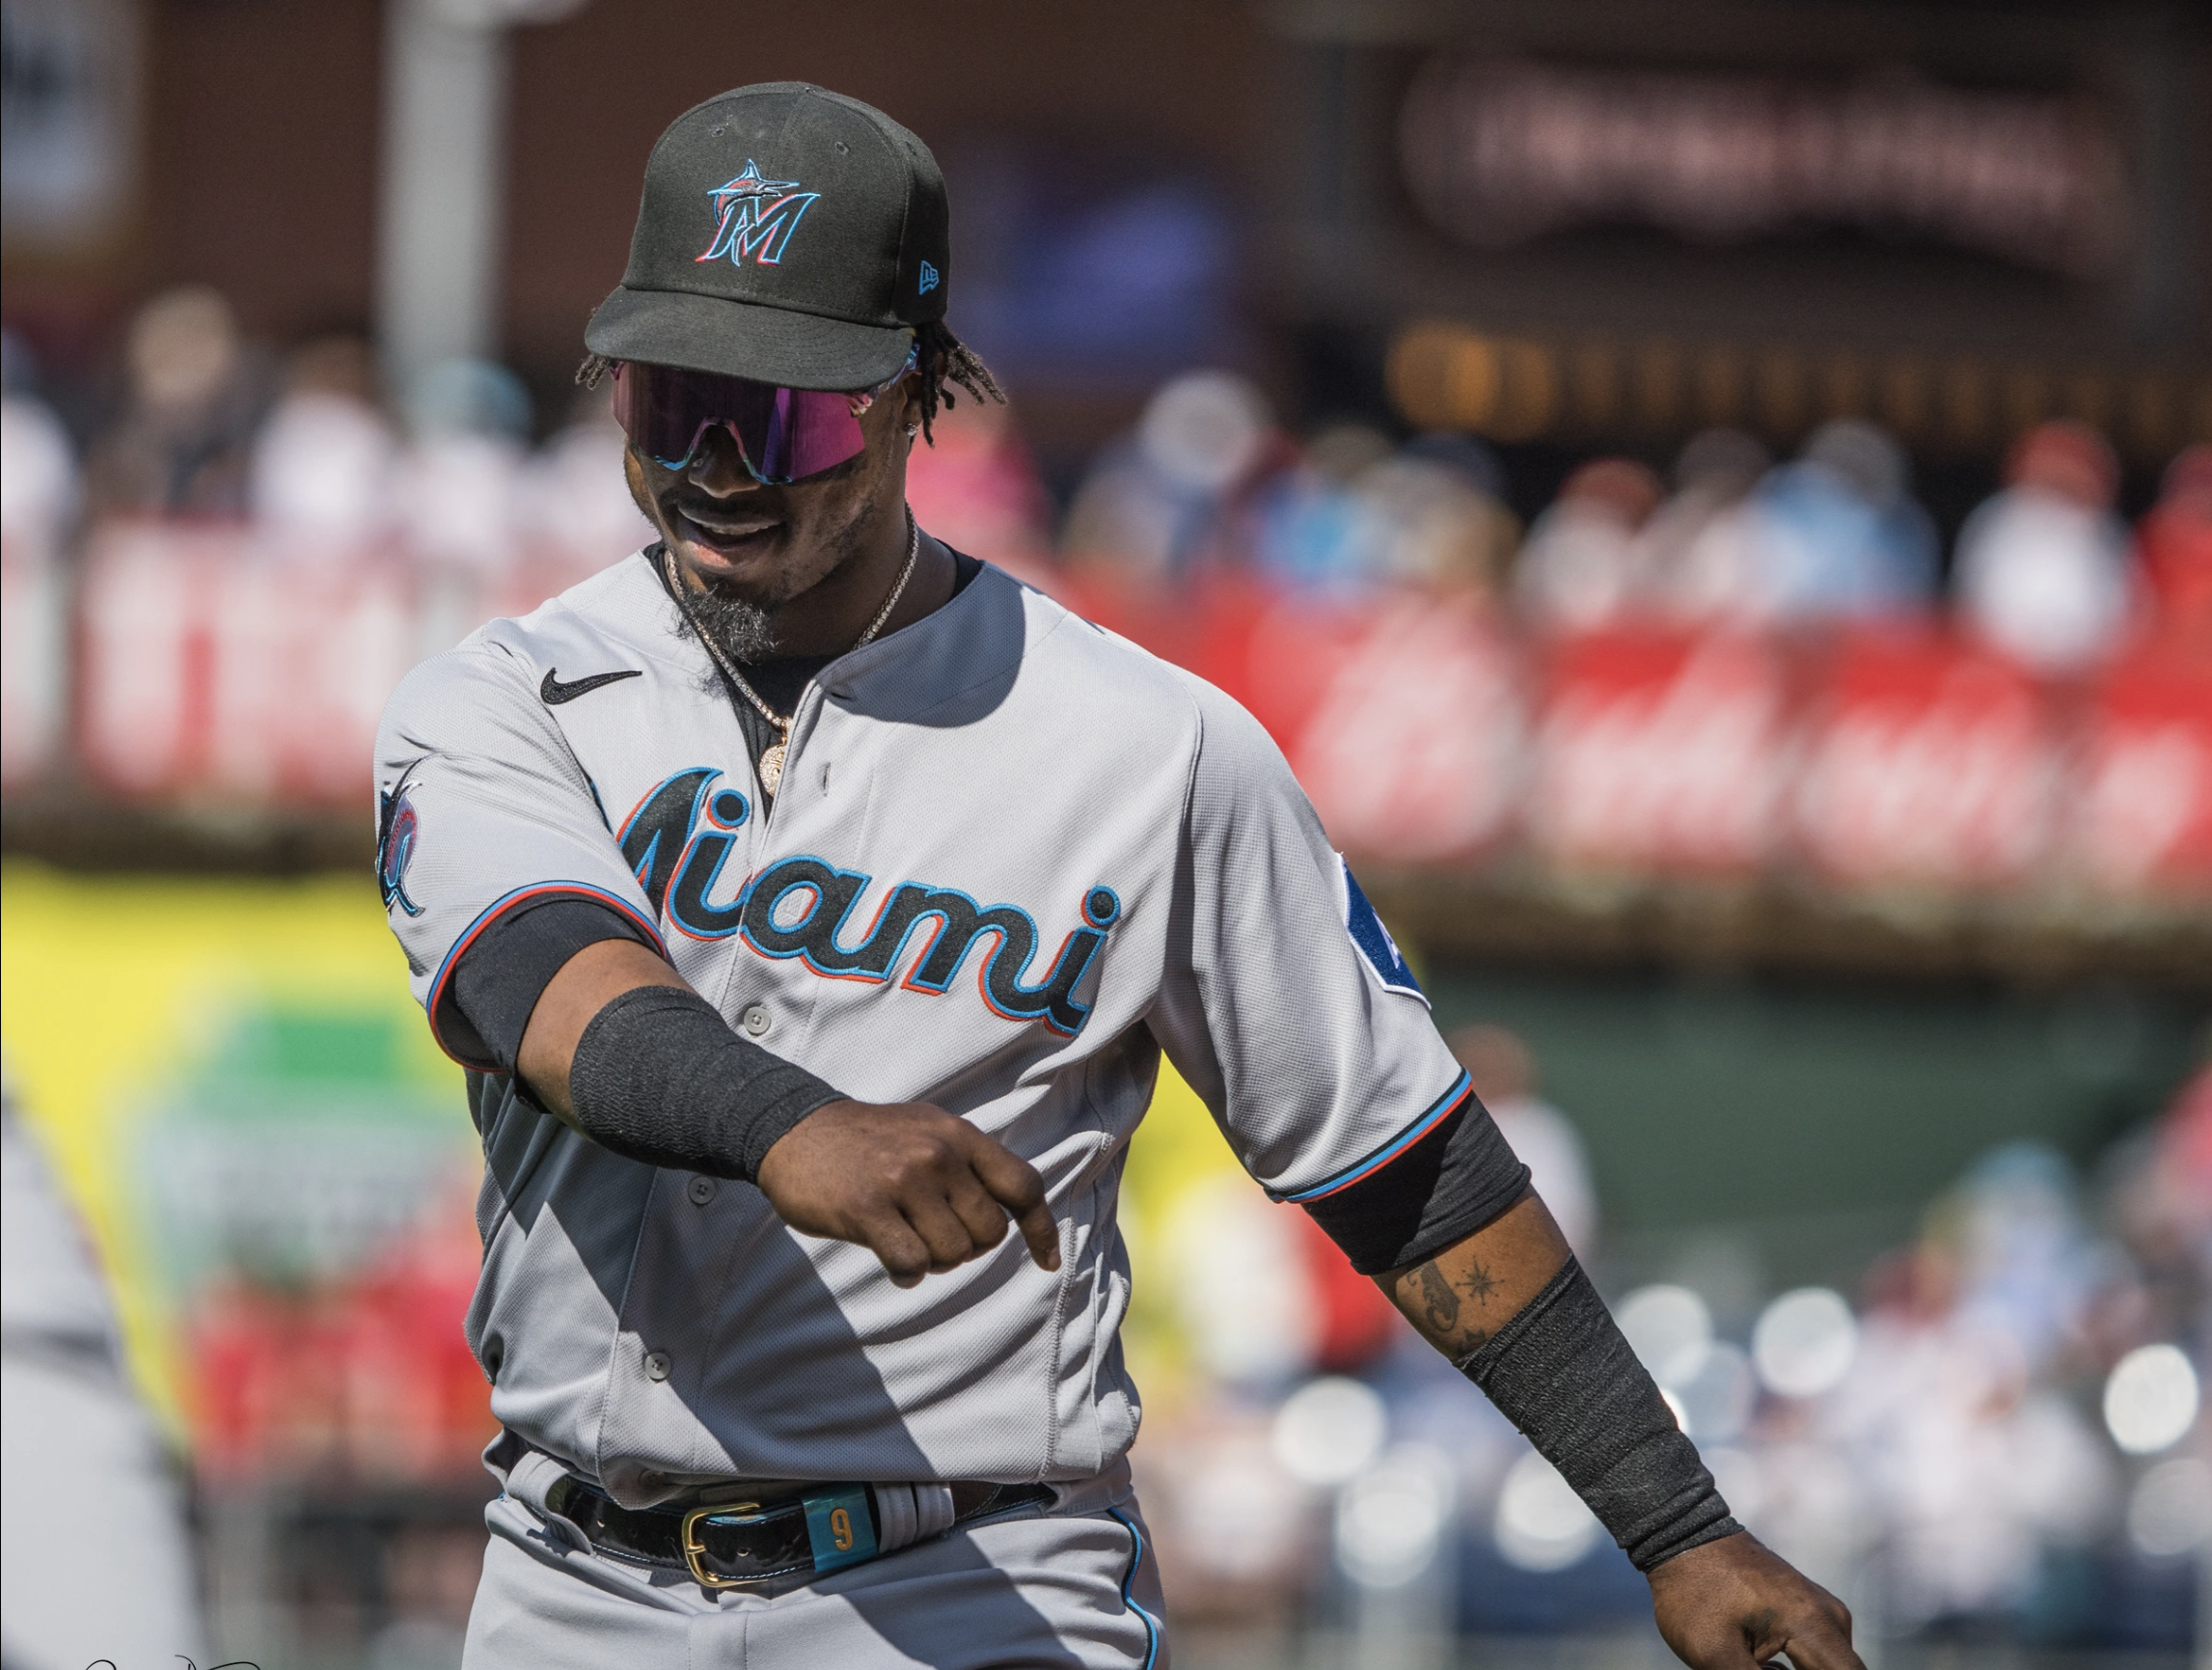 Jean Segura to undergo finger surgery, out 10-12 weeks